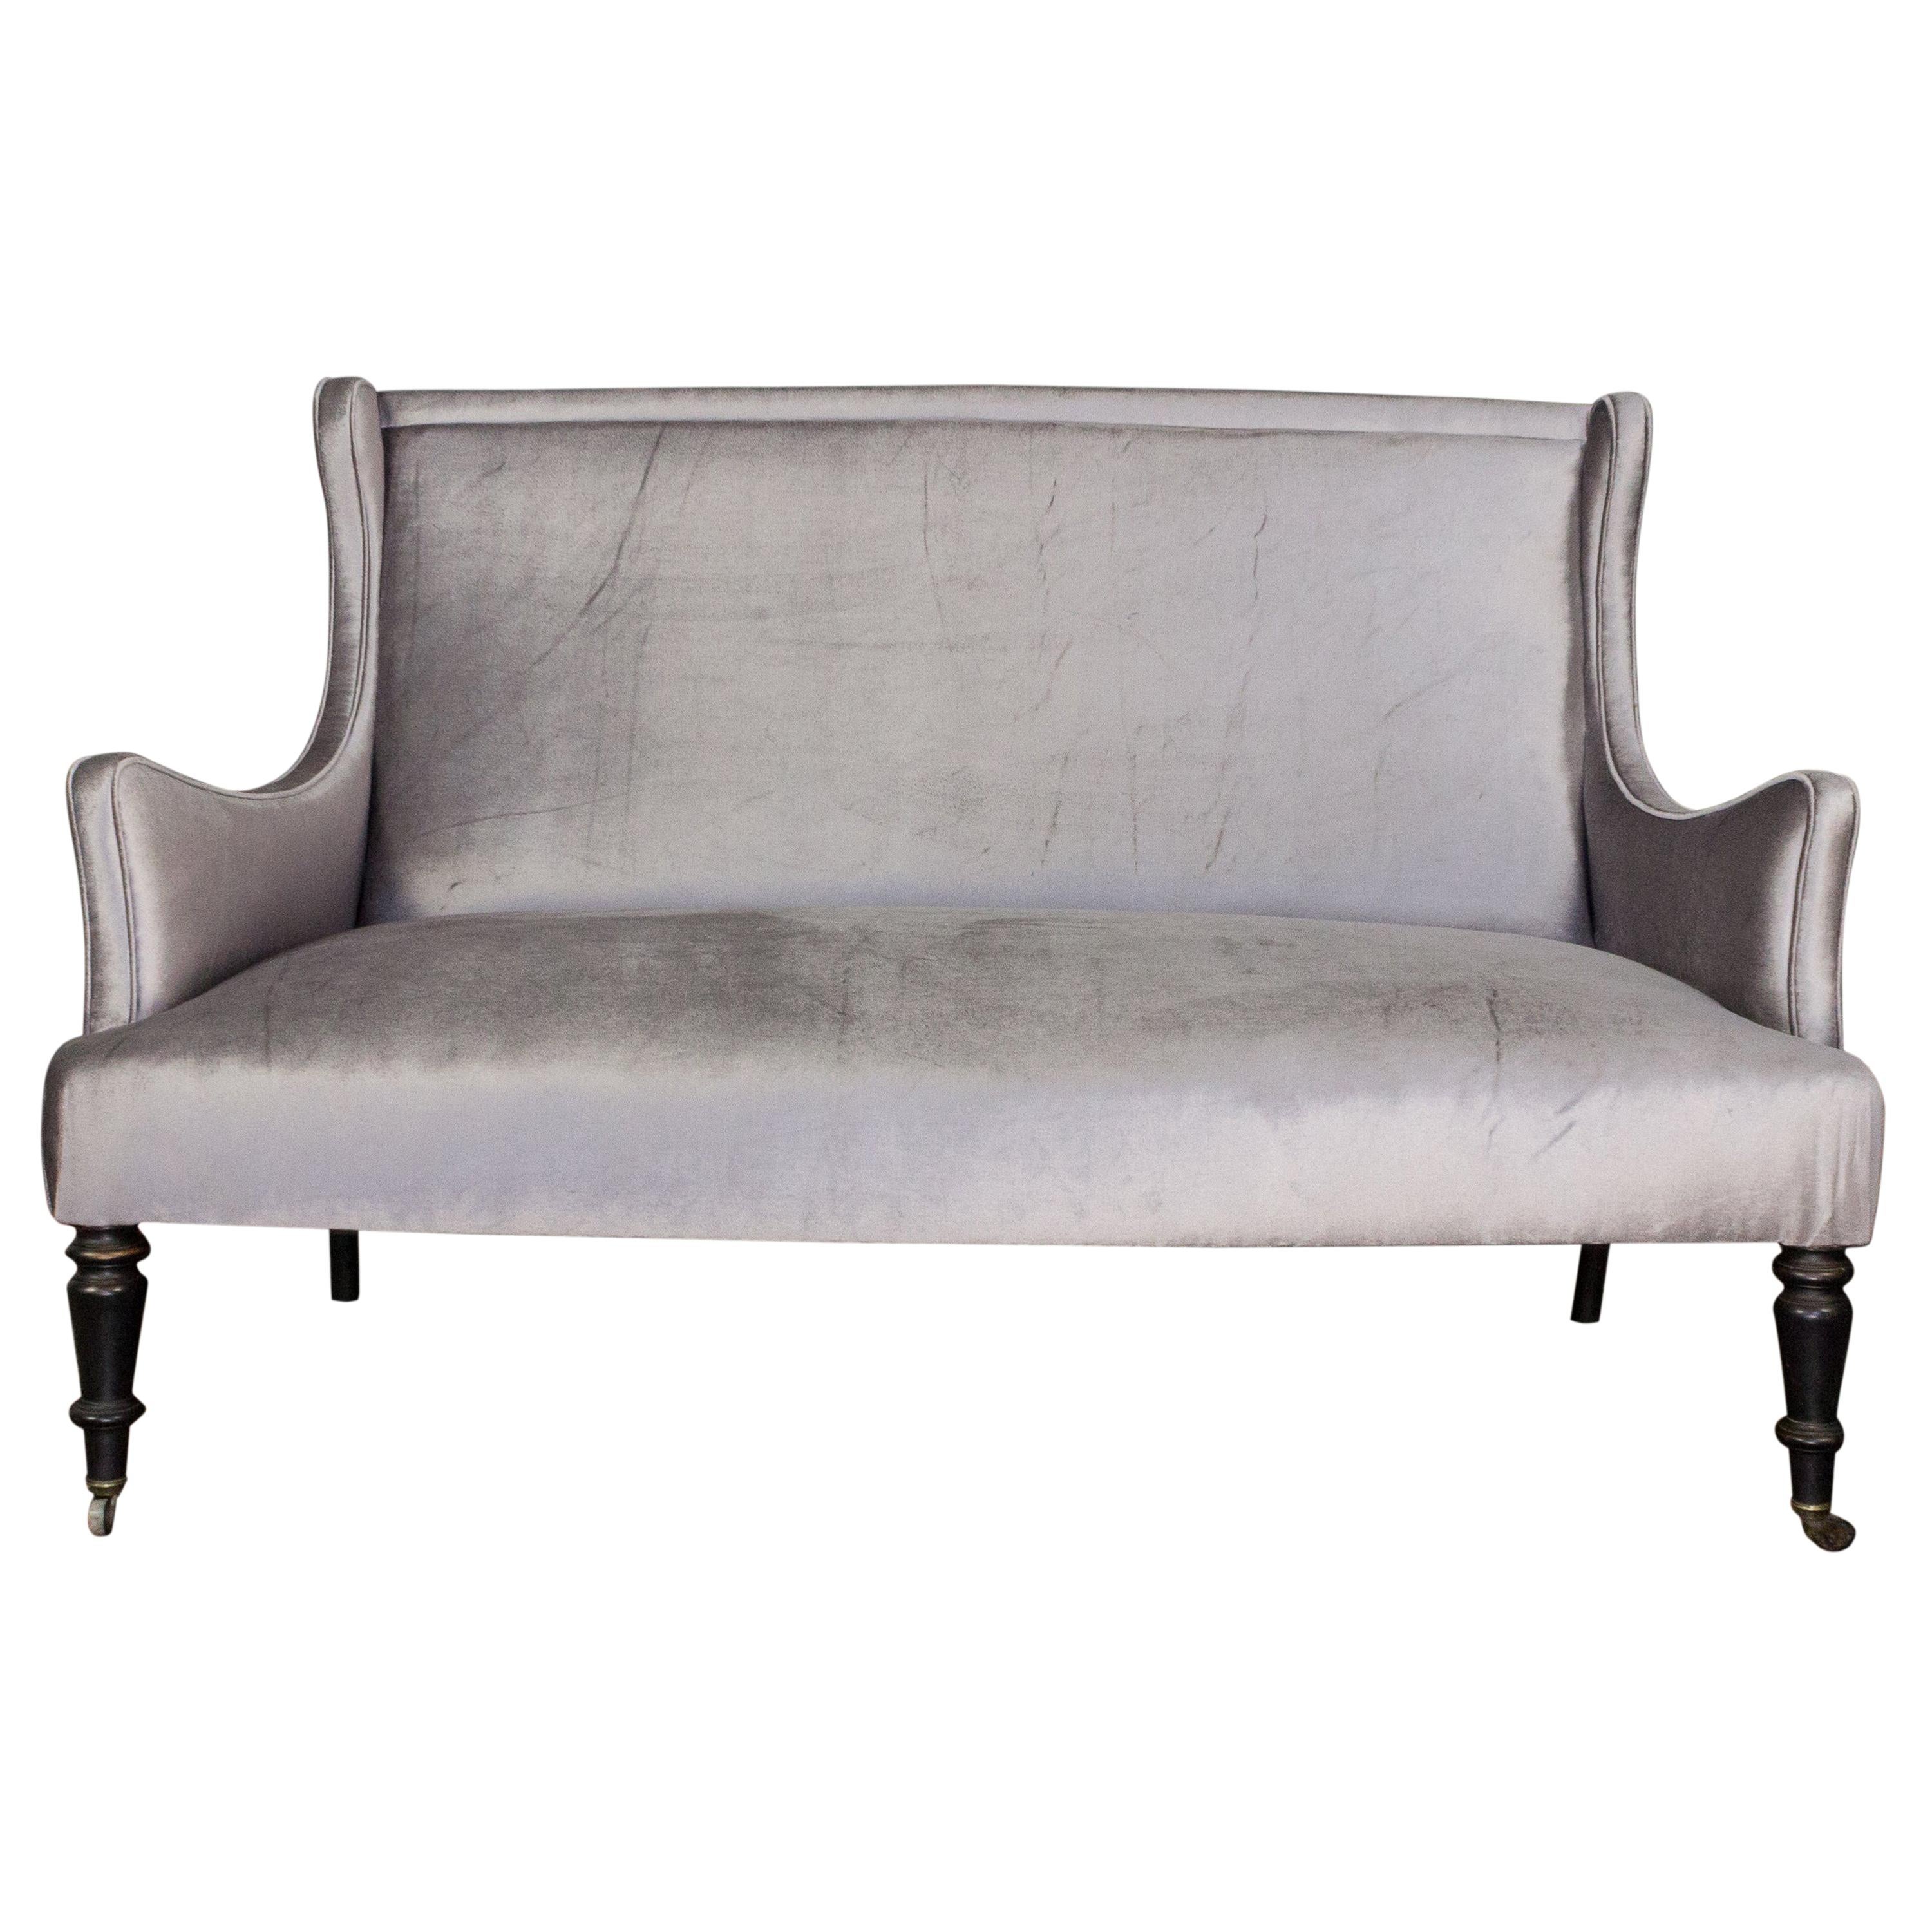 French 19th Century  Settee in Silvery Grey Velvet